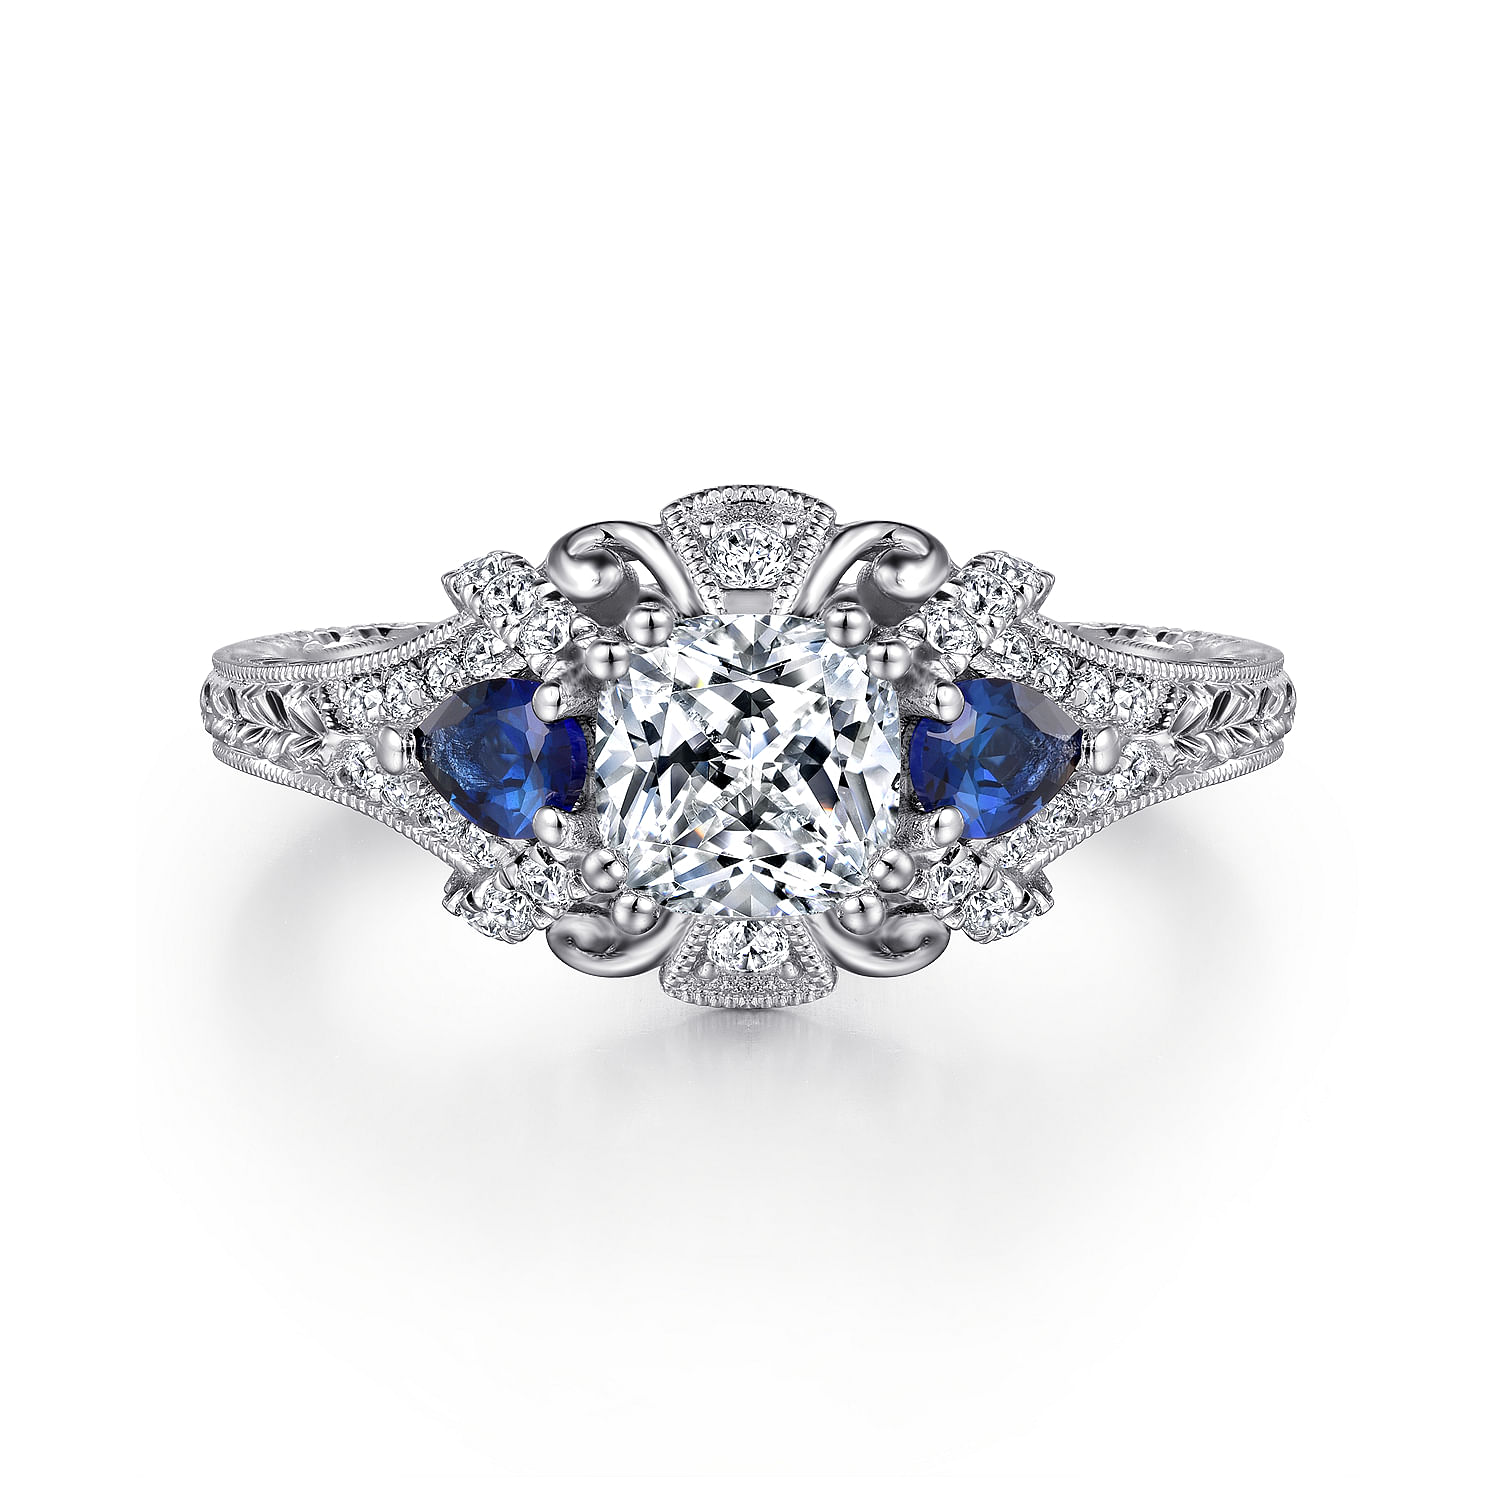 Chrystie - Vintage Inspired Platinum Cushion Cut Sapphire and Diamond Engagement Ring